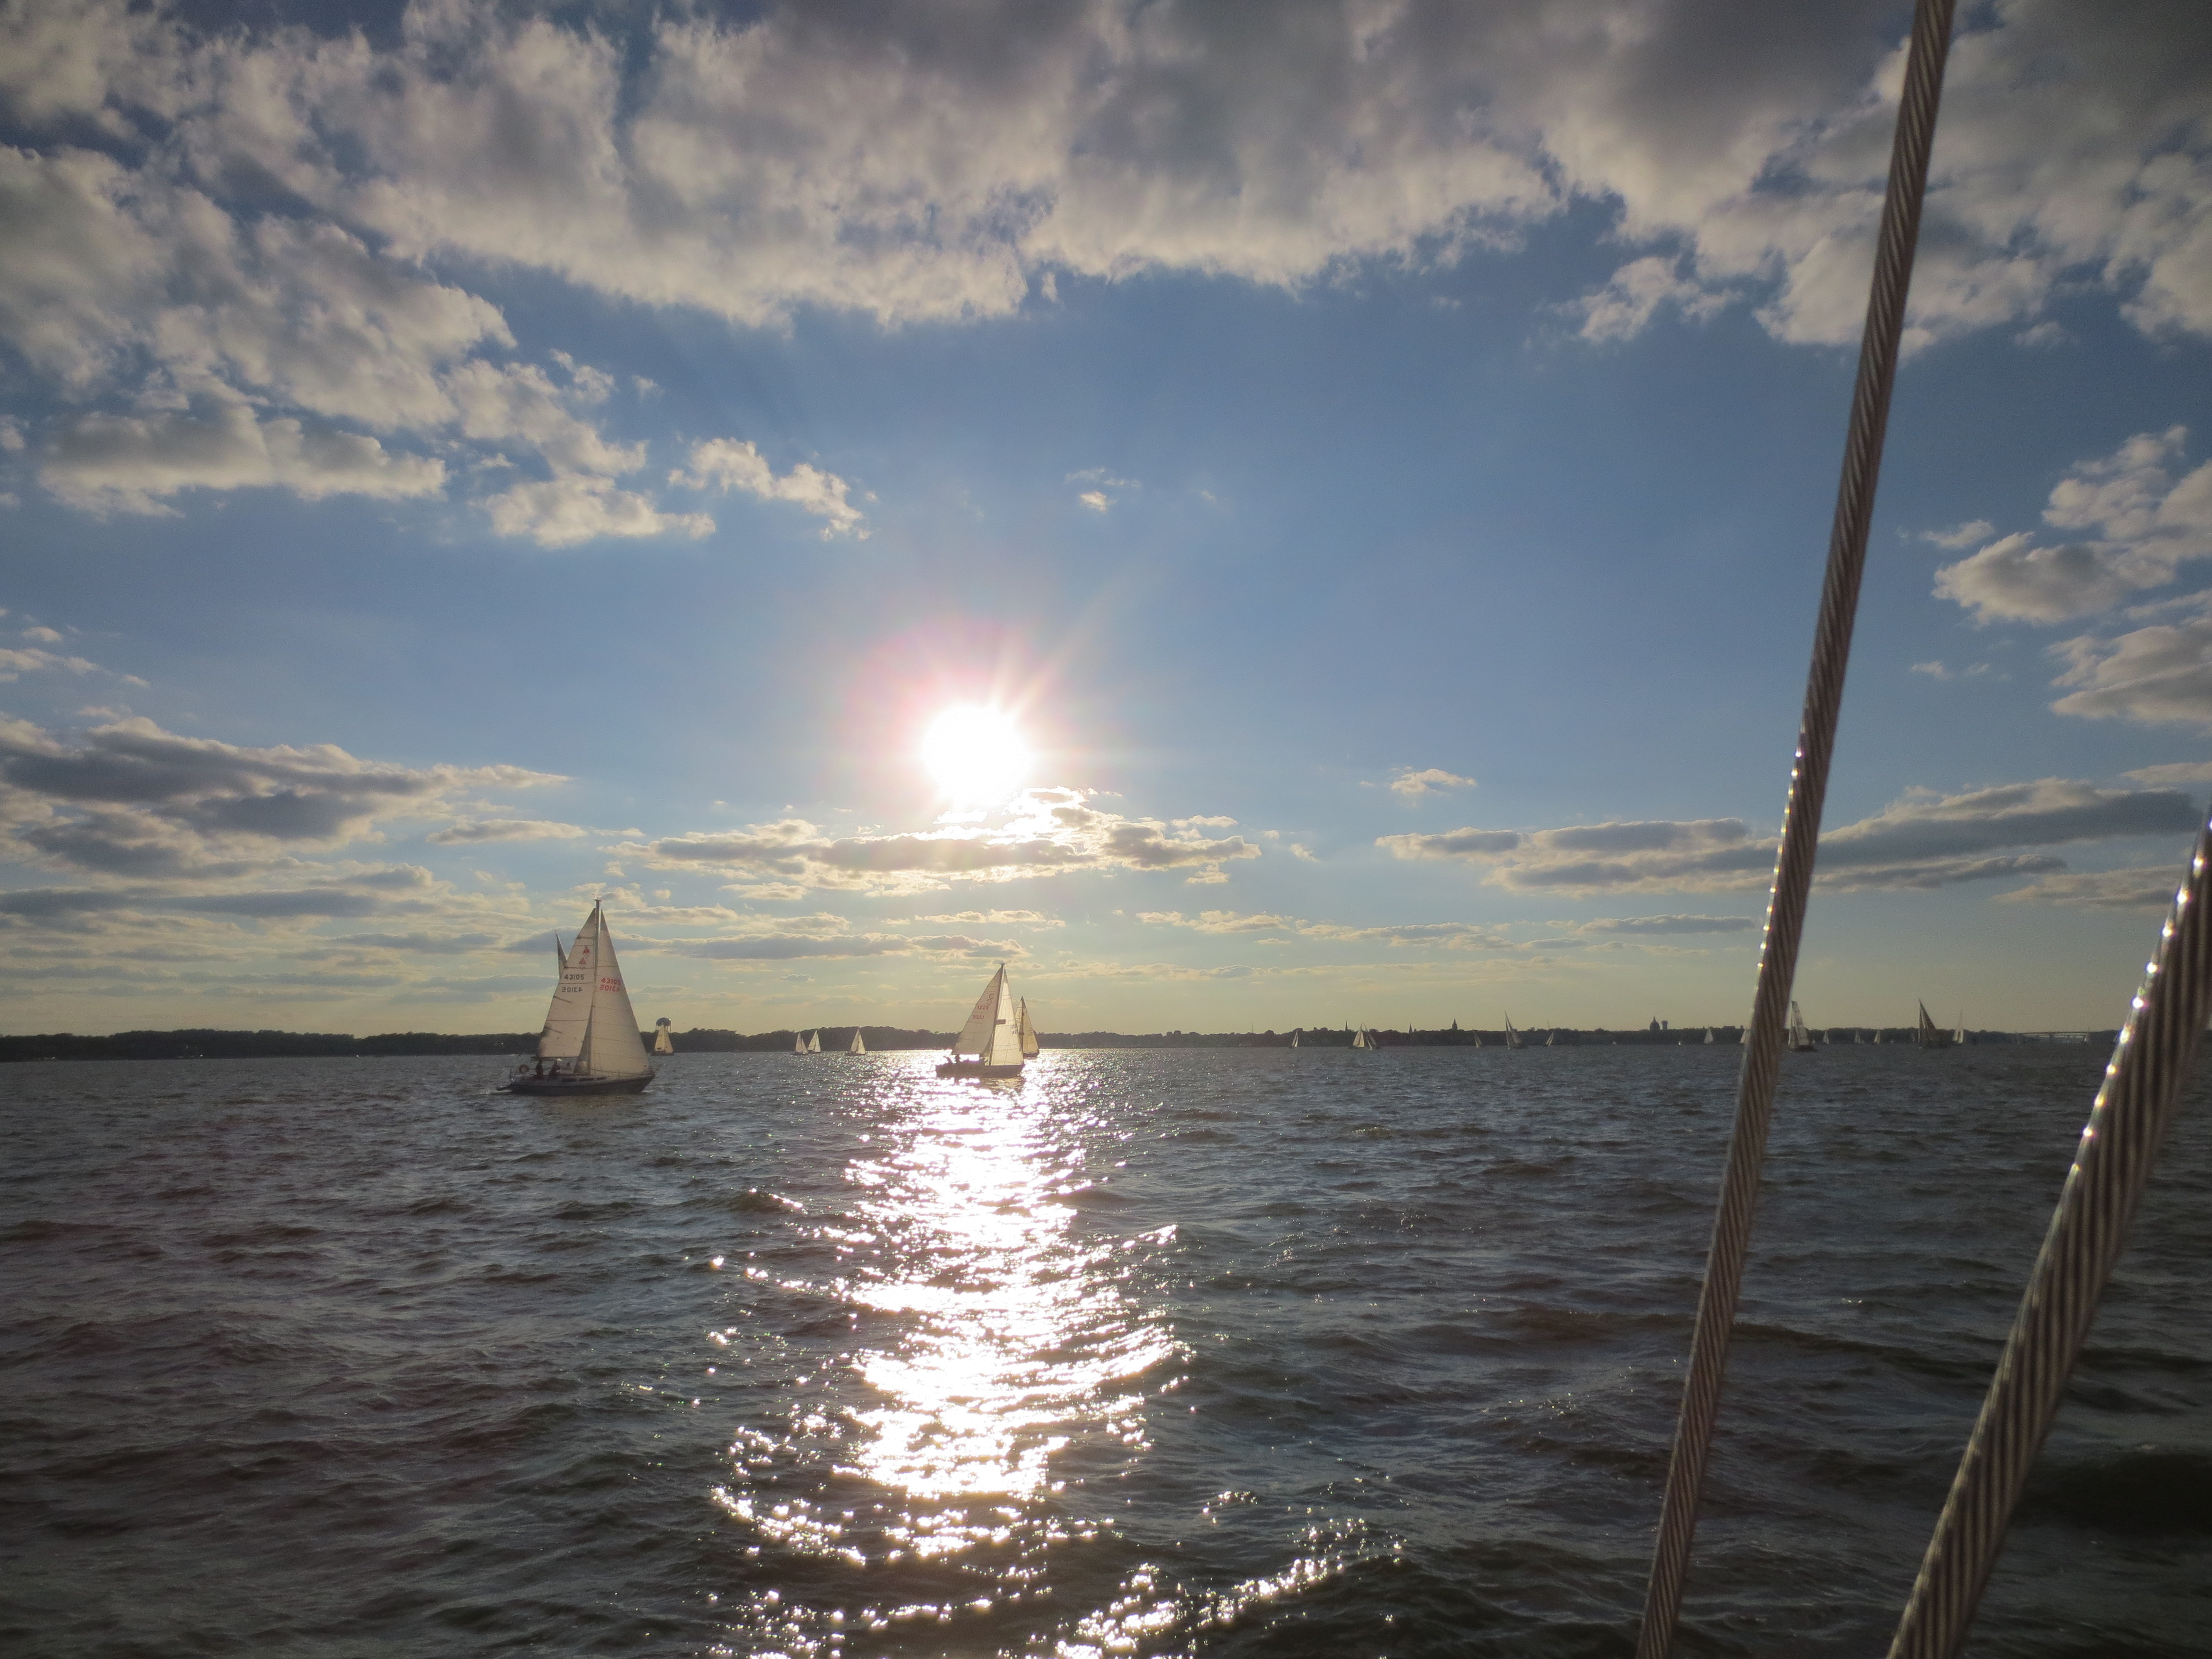 Sun reflecting on Chesapeake waters with sailboats everywhere